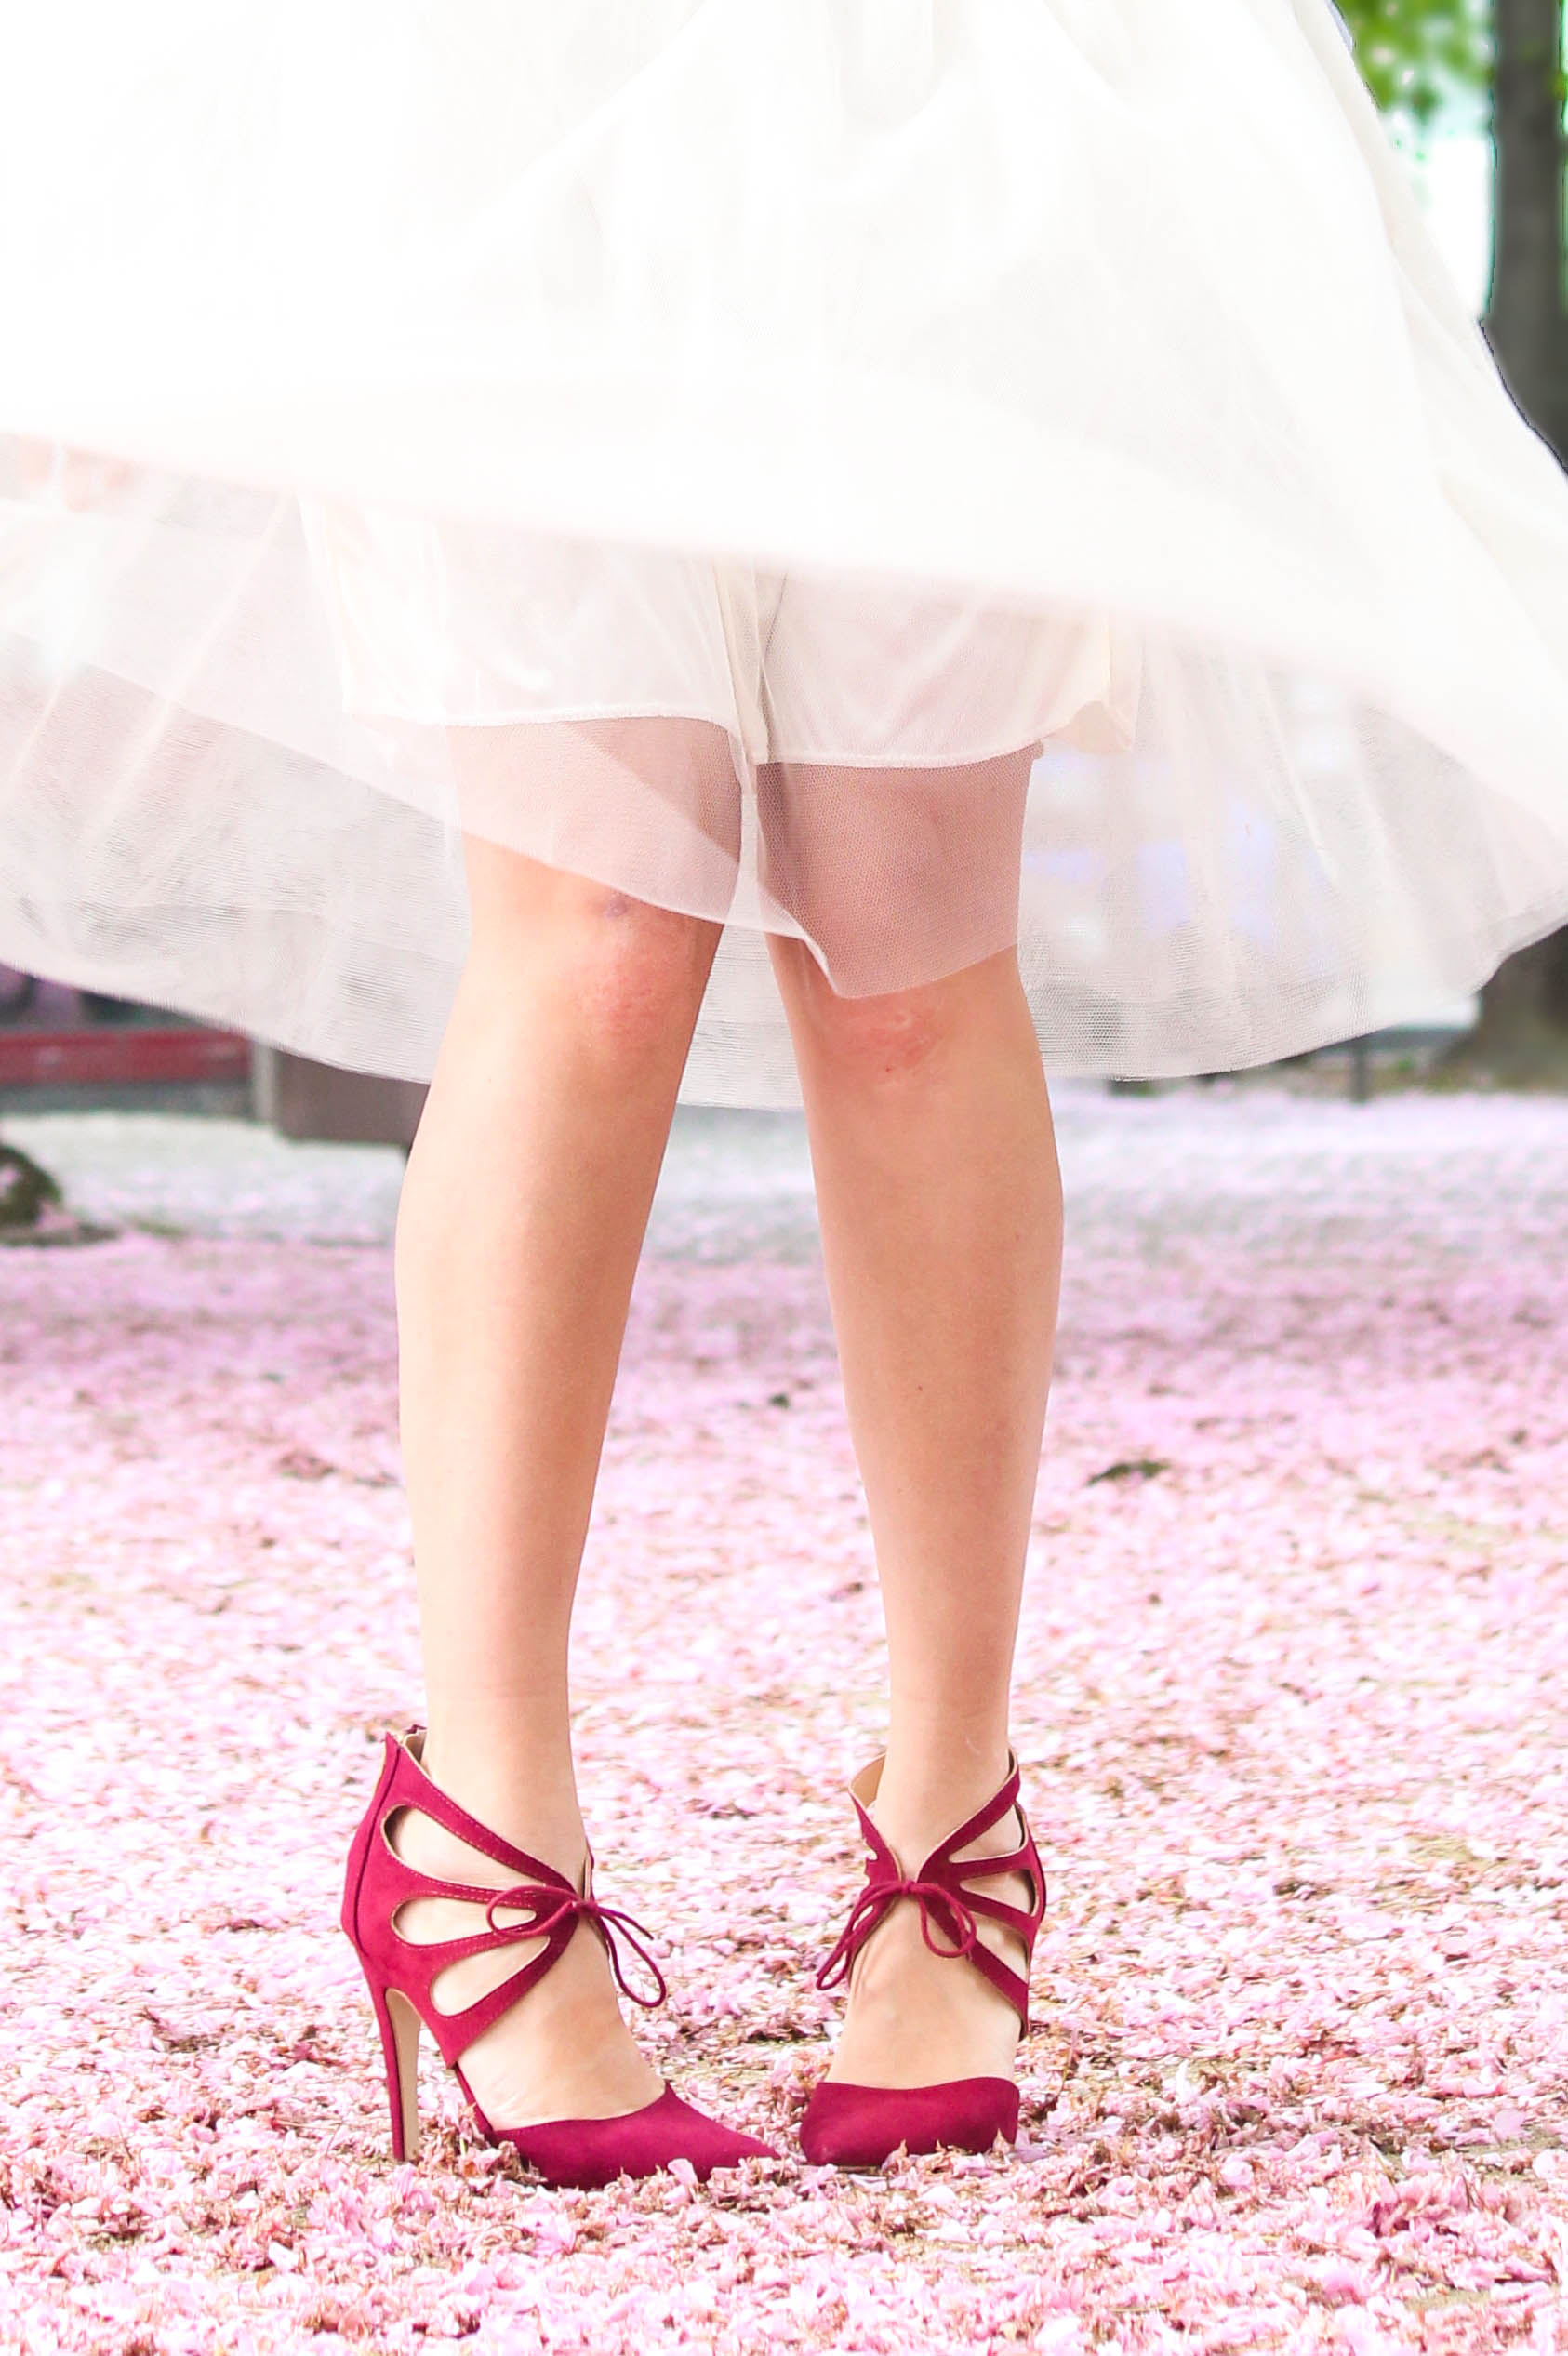 Des Belles Choses_Cherry Blossom Tulle Story 9